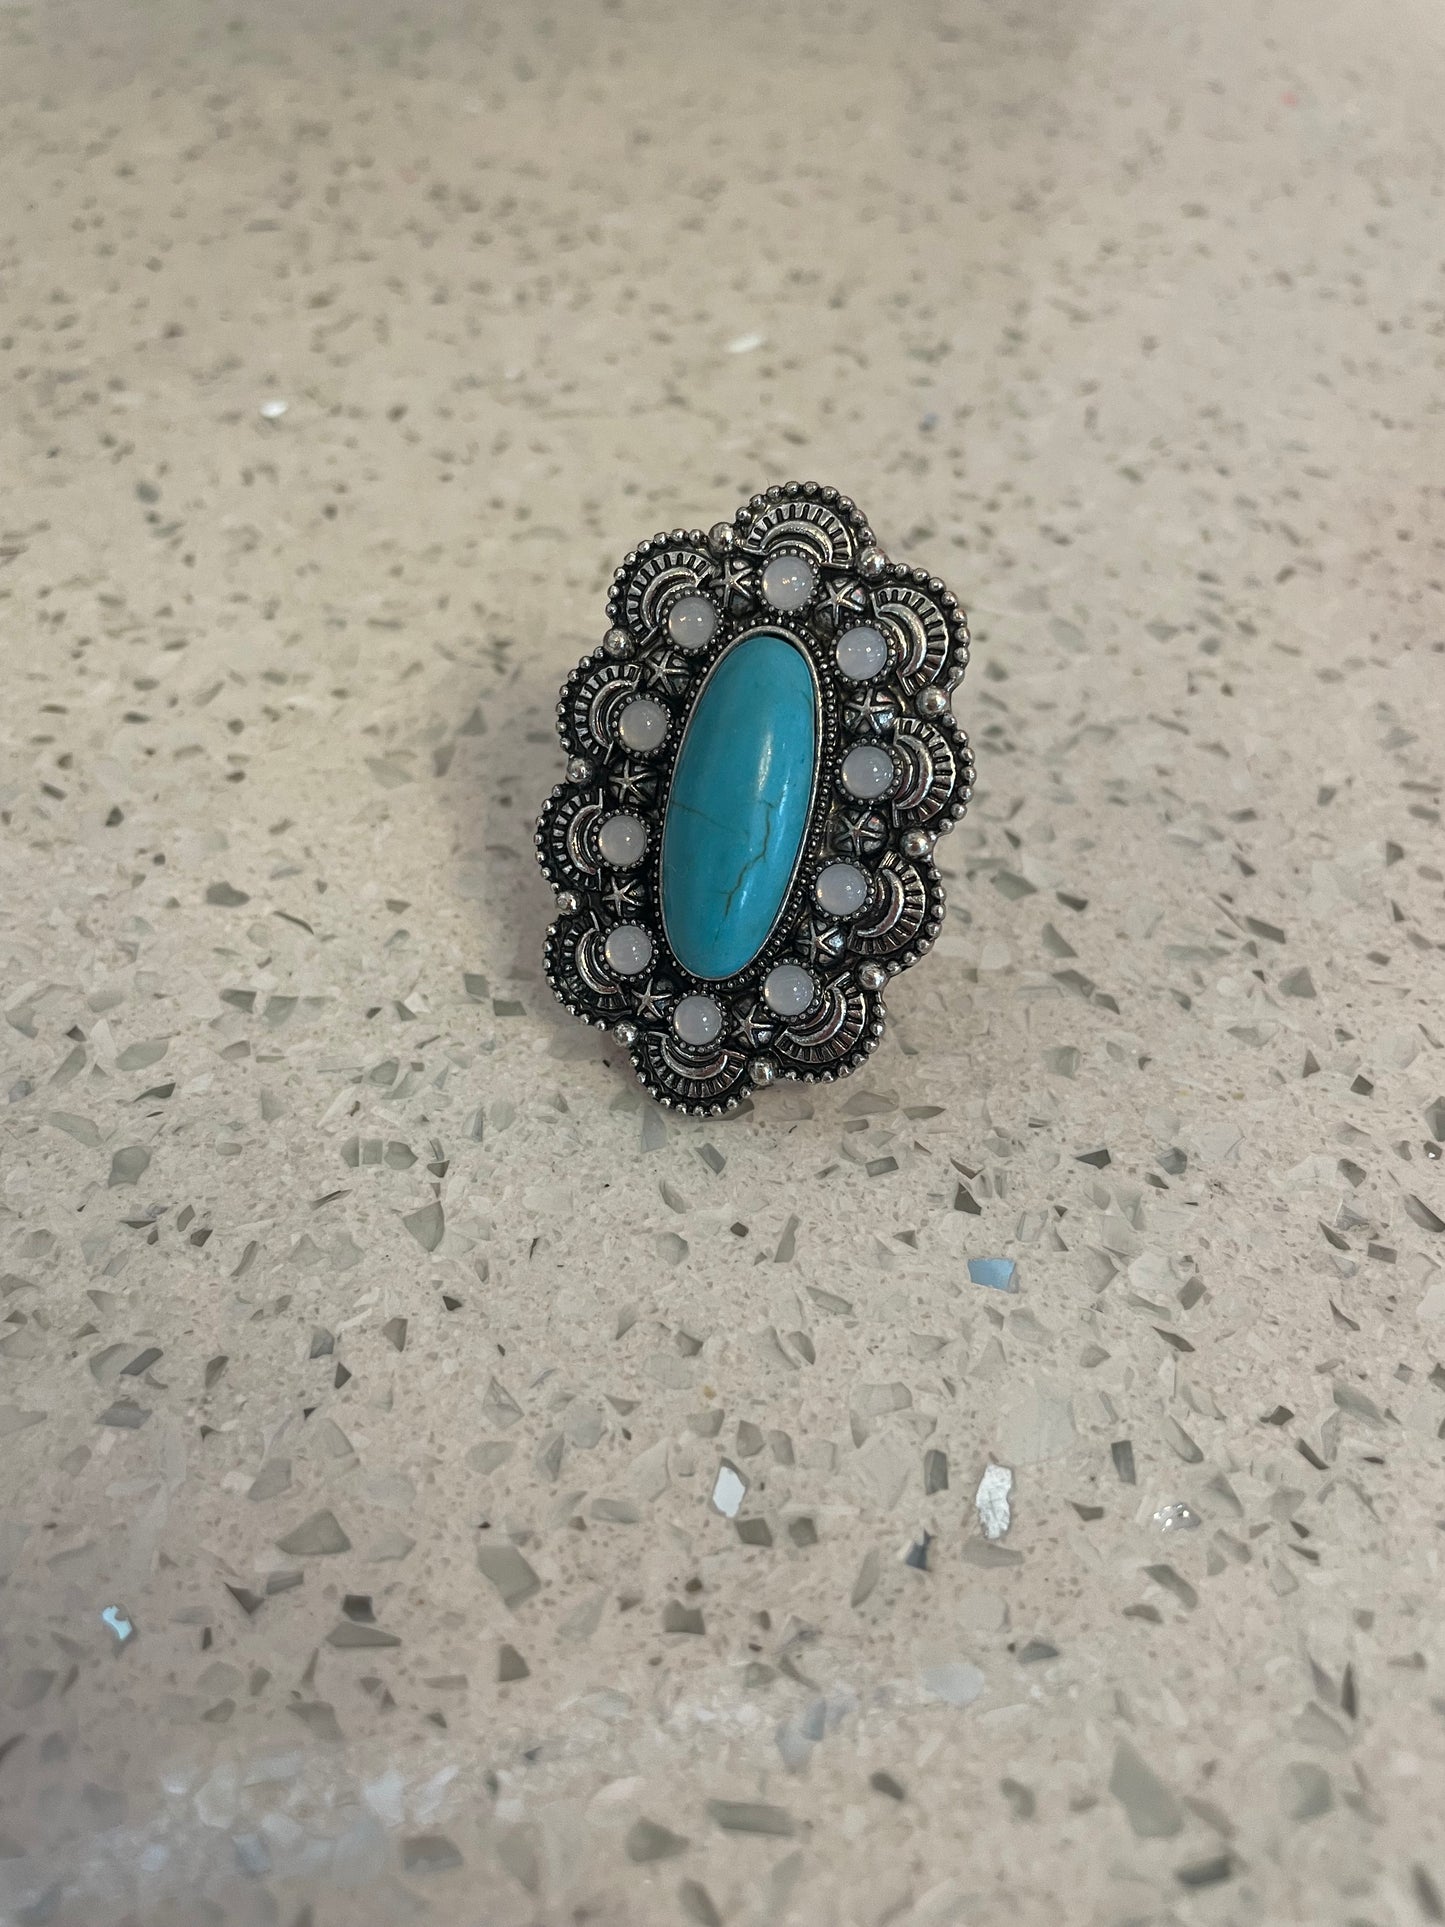 Large Turquoise Ring/Wildrag Cuff